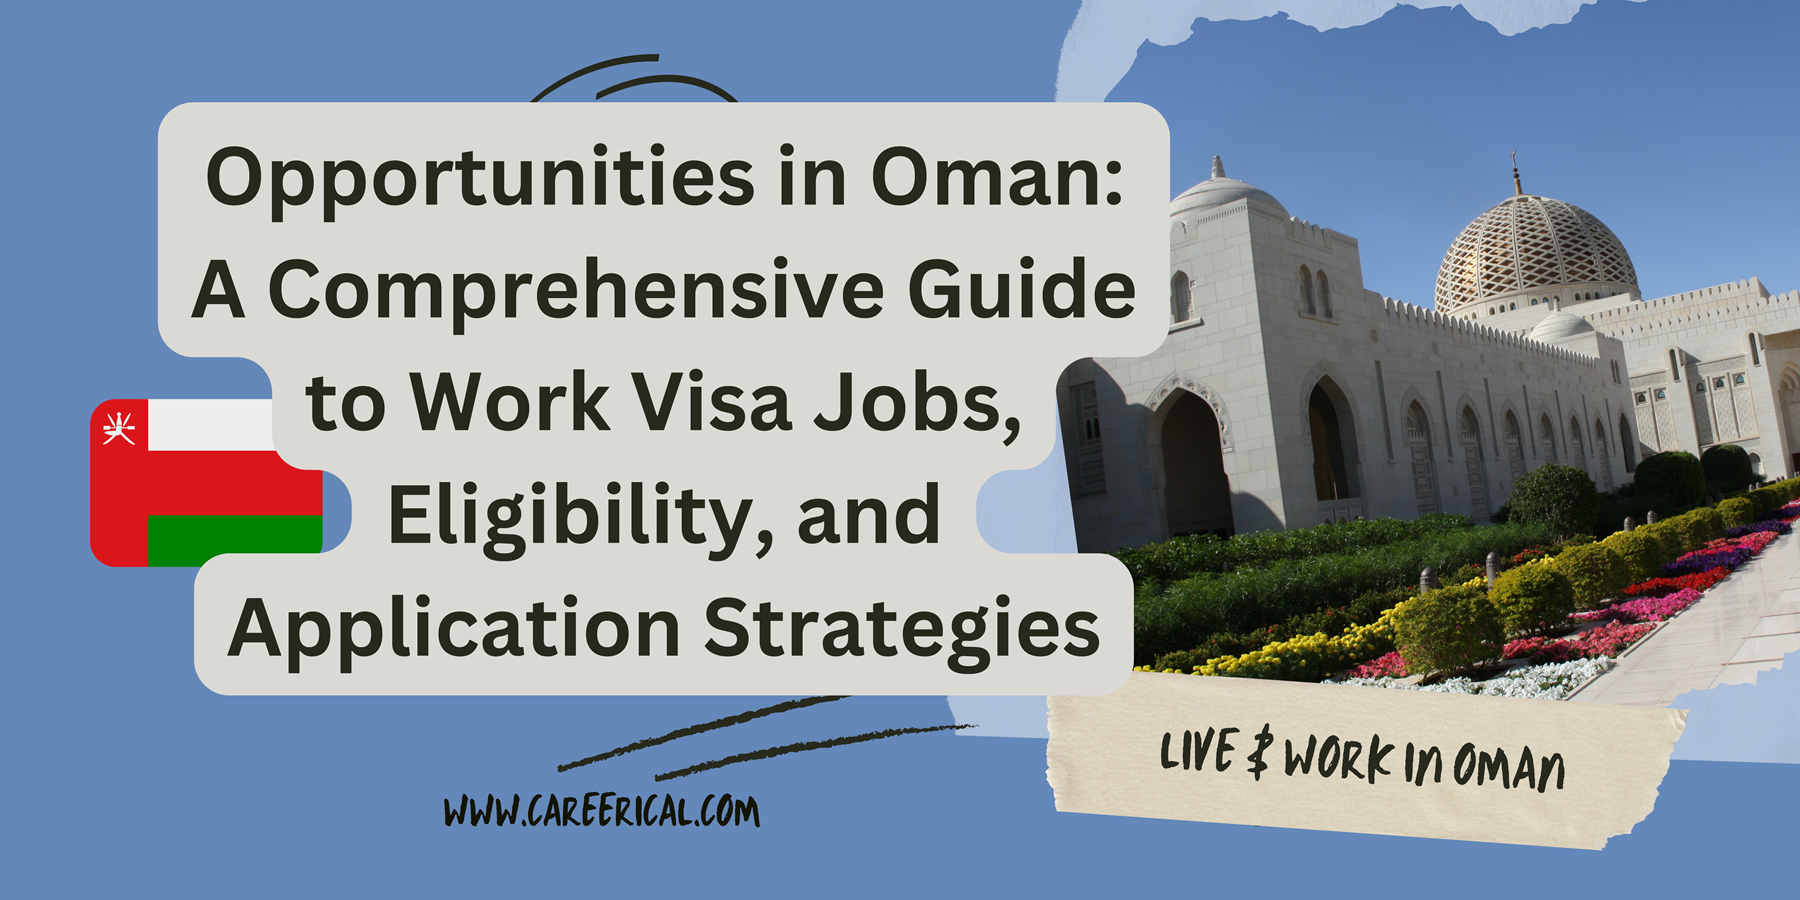 Opportunities in Oman A Comprehensive Guide to Work Visa Jobs, Eligibility, and Application Strategies